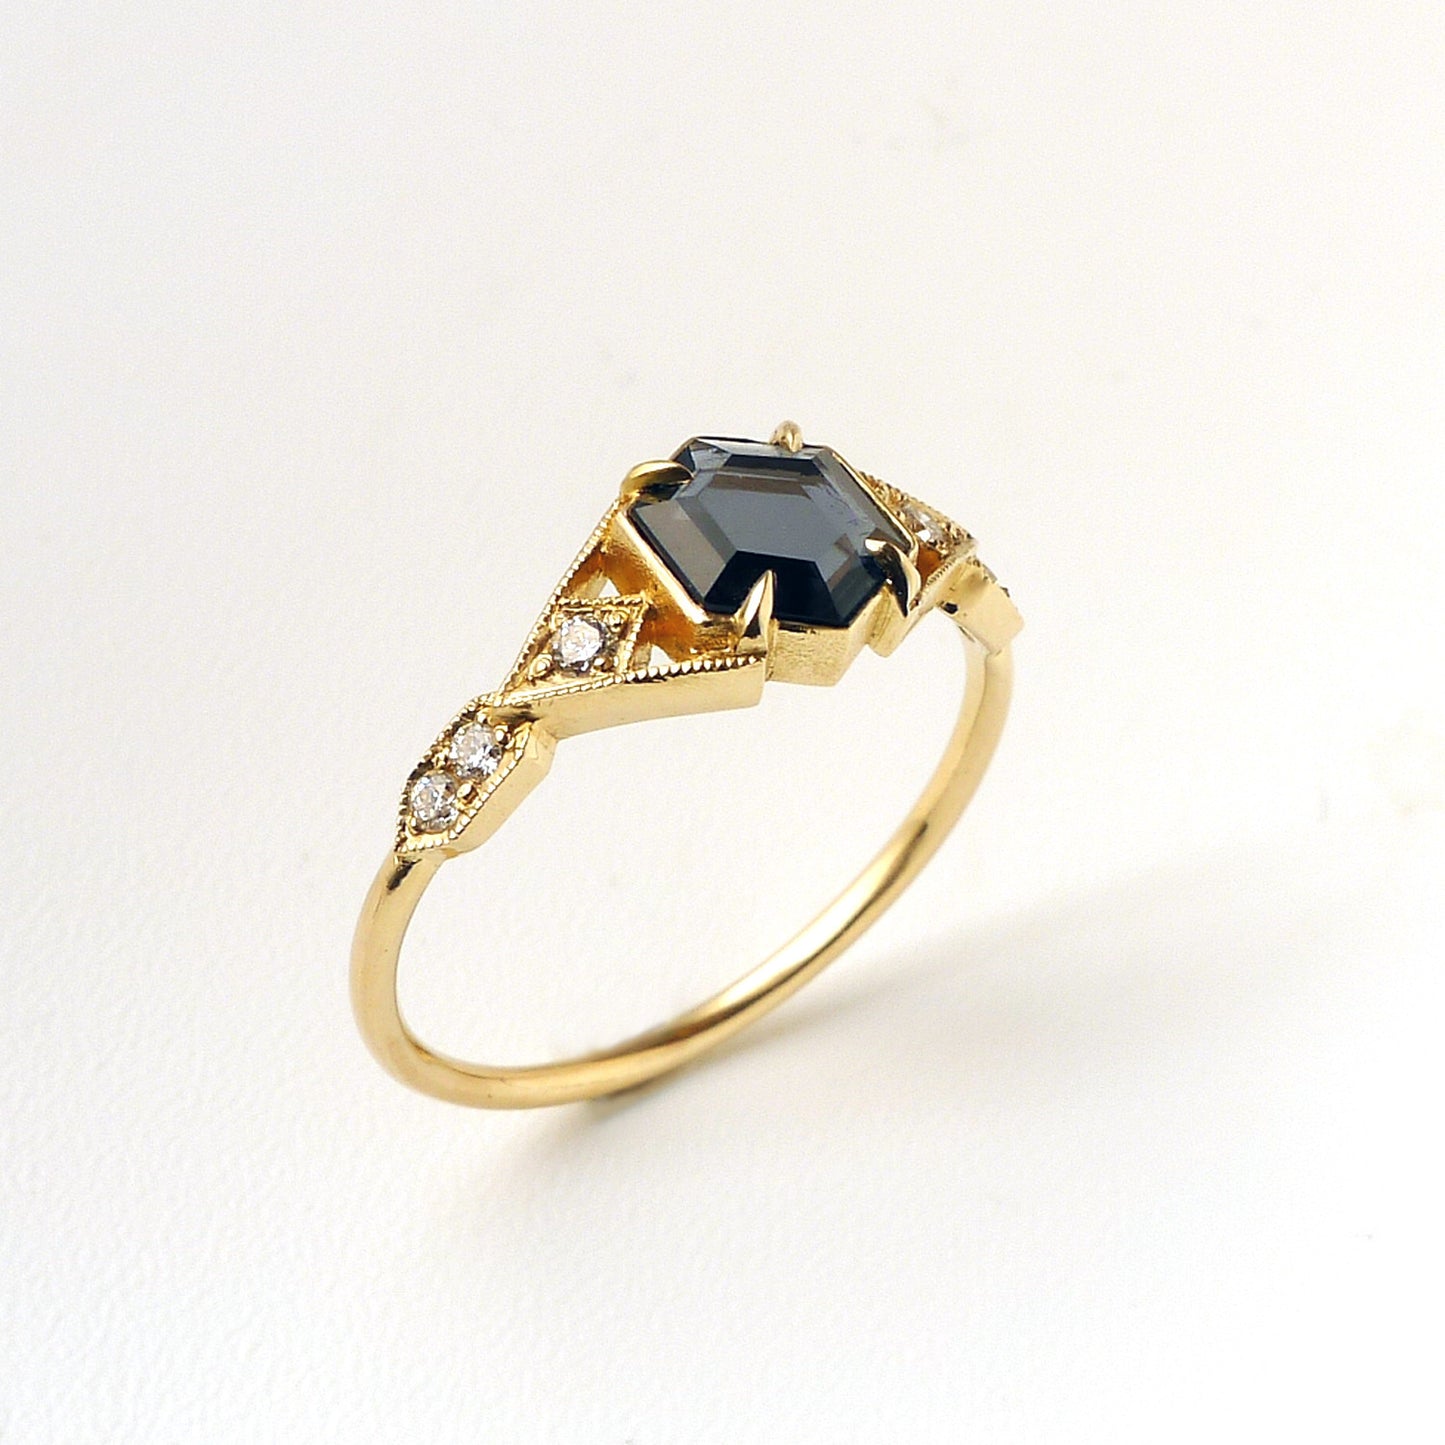 Load image into Gallery viewer, Casia Vestra Ring with Portrait Cut Spinel
